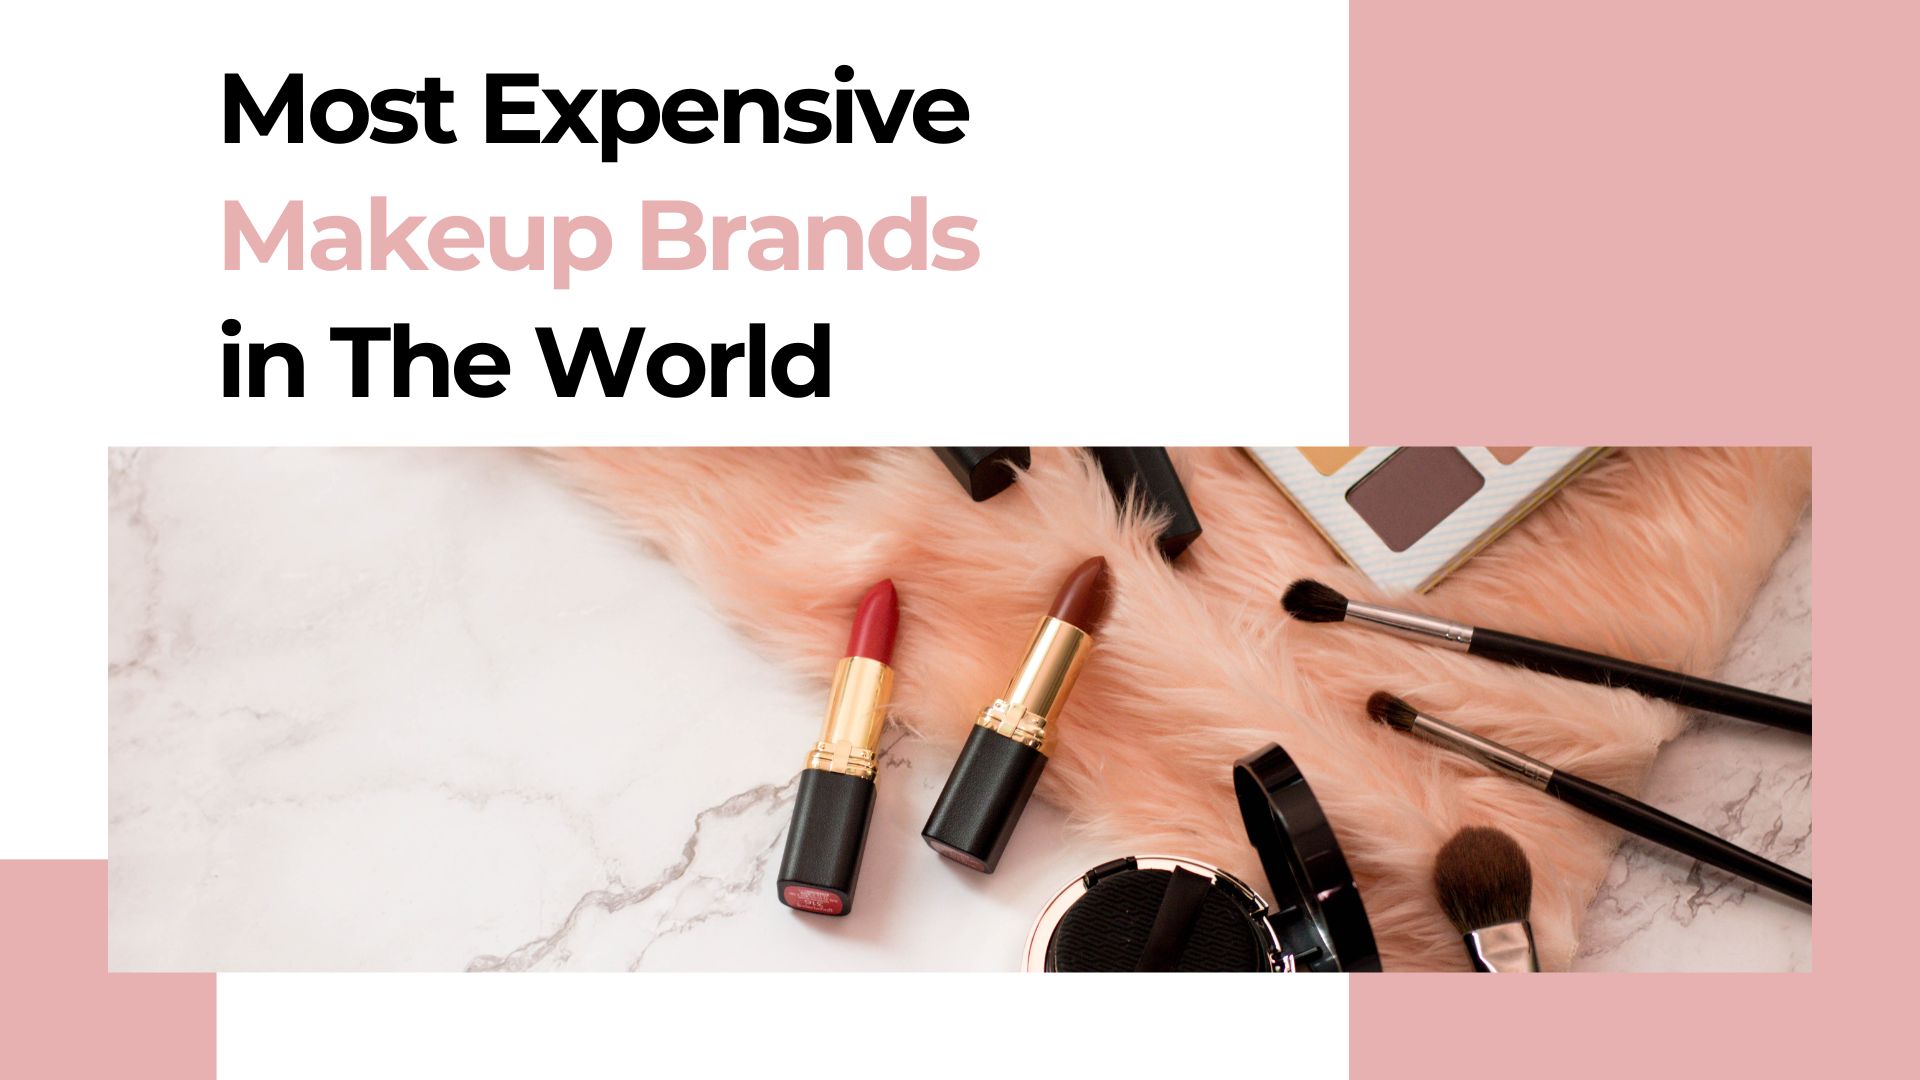 The Top 10 Most Expensive Makeup Brands in the World